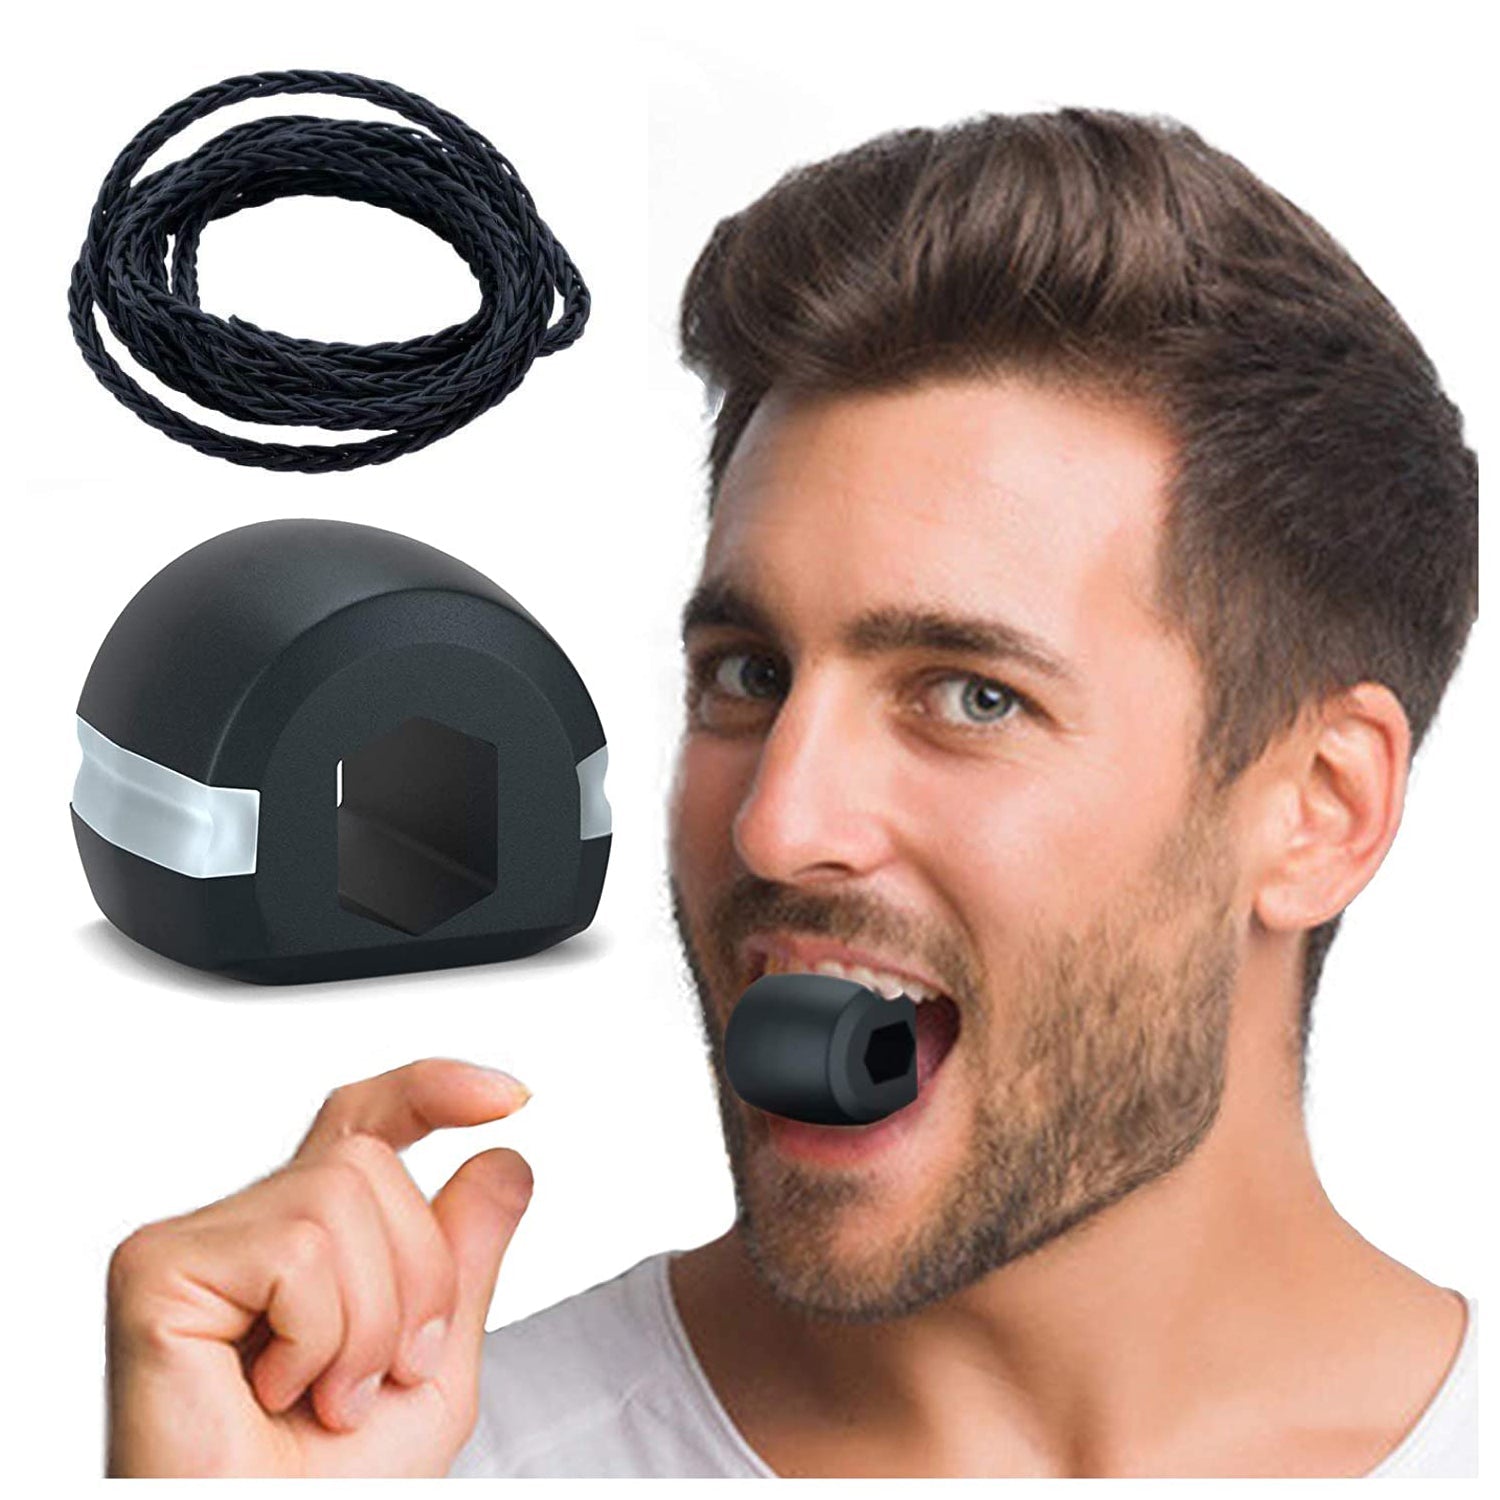 6101V Cn Blk Jaw Exerciser Used To Gain Sharp And Chiselled Jawline Easily And Fast.